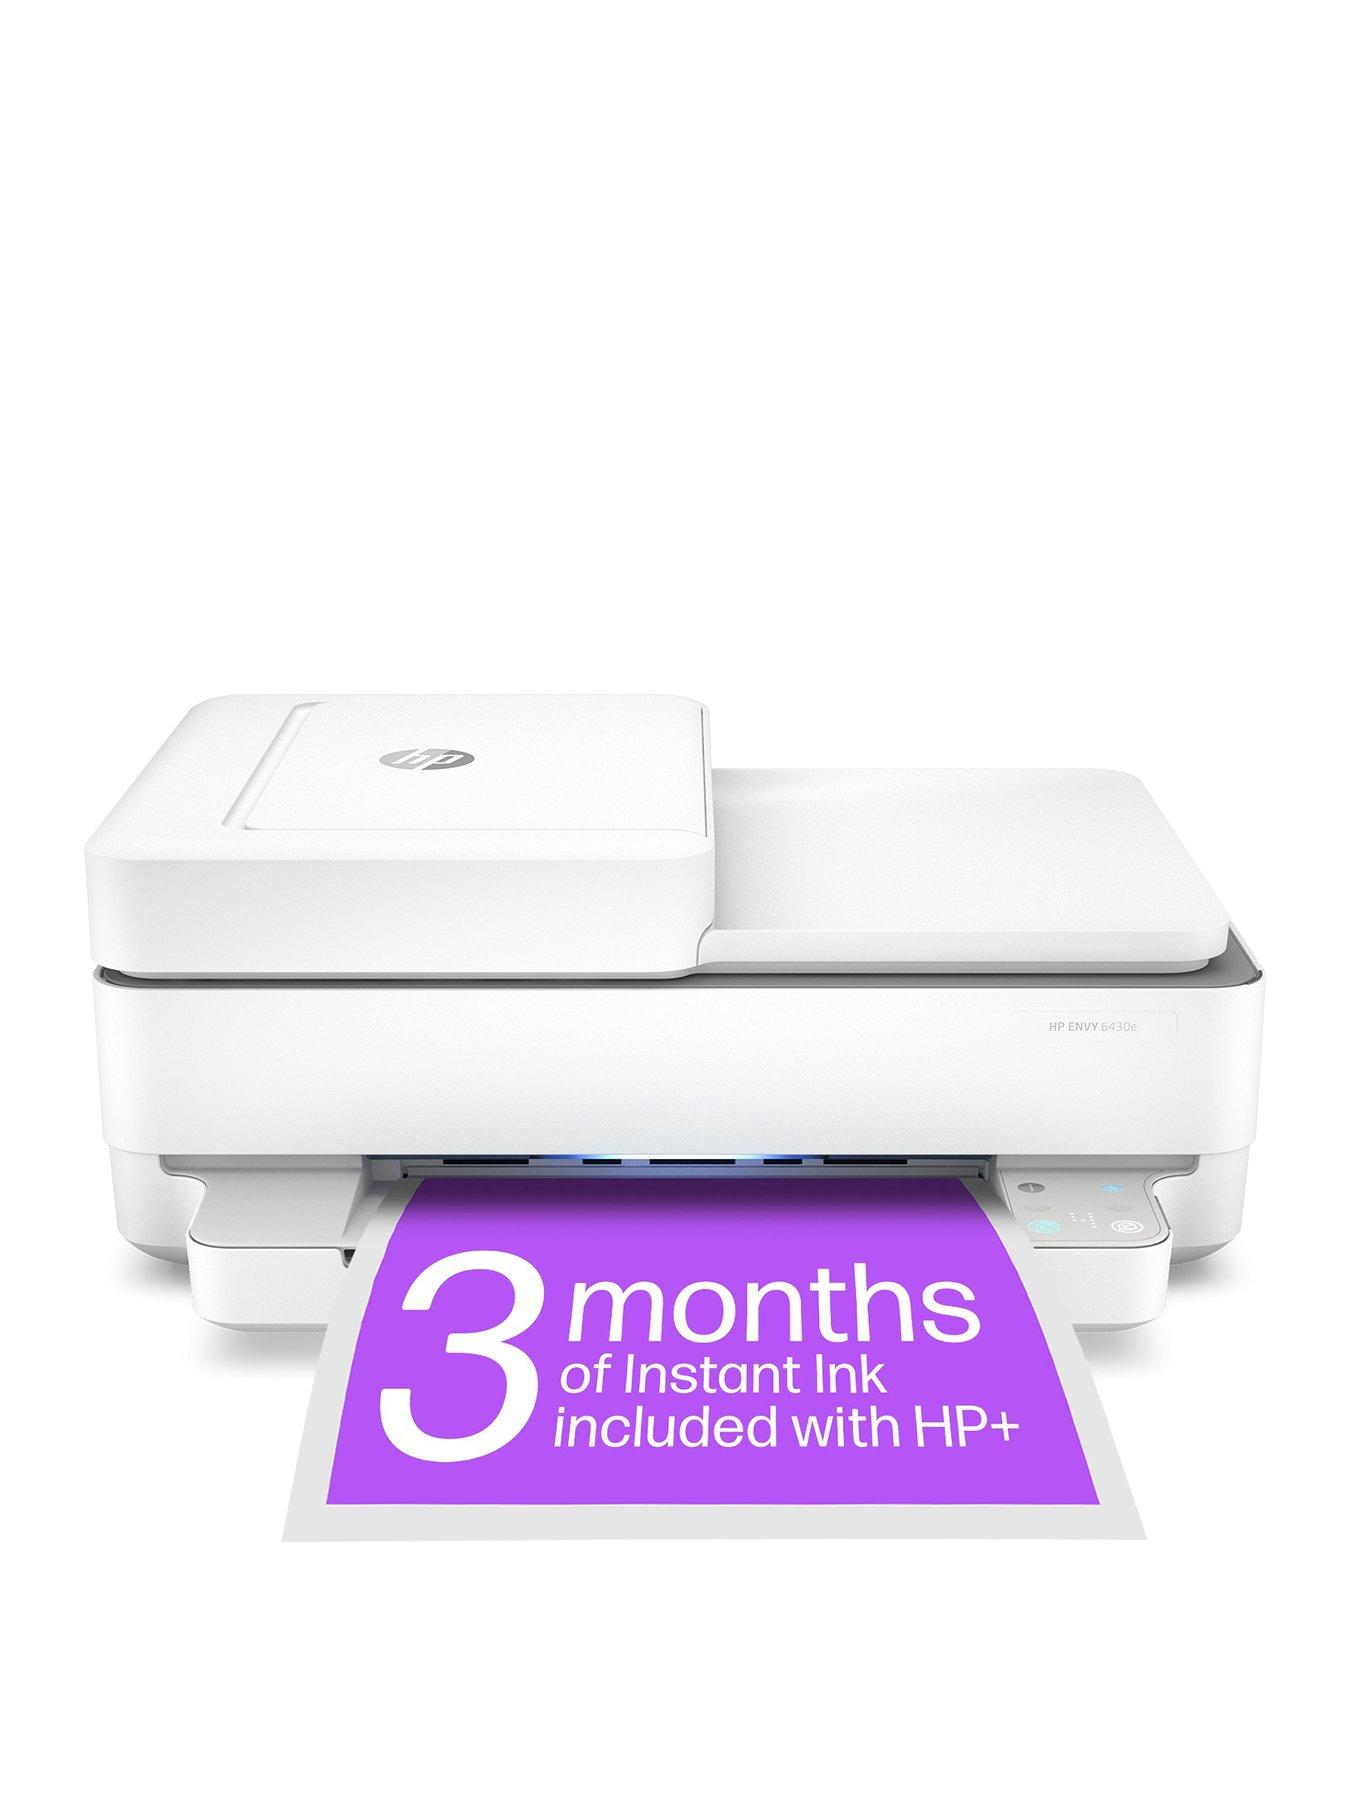 HP ENVY 6430e All-in-One Printer - HP Store Switzerland